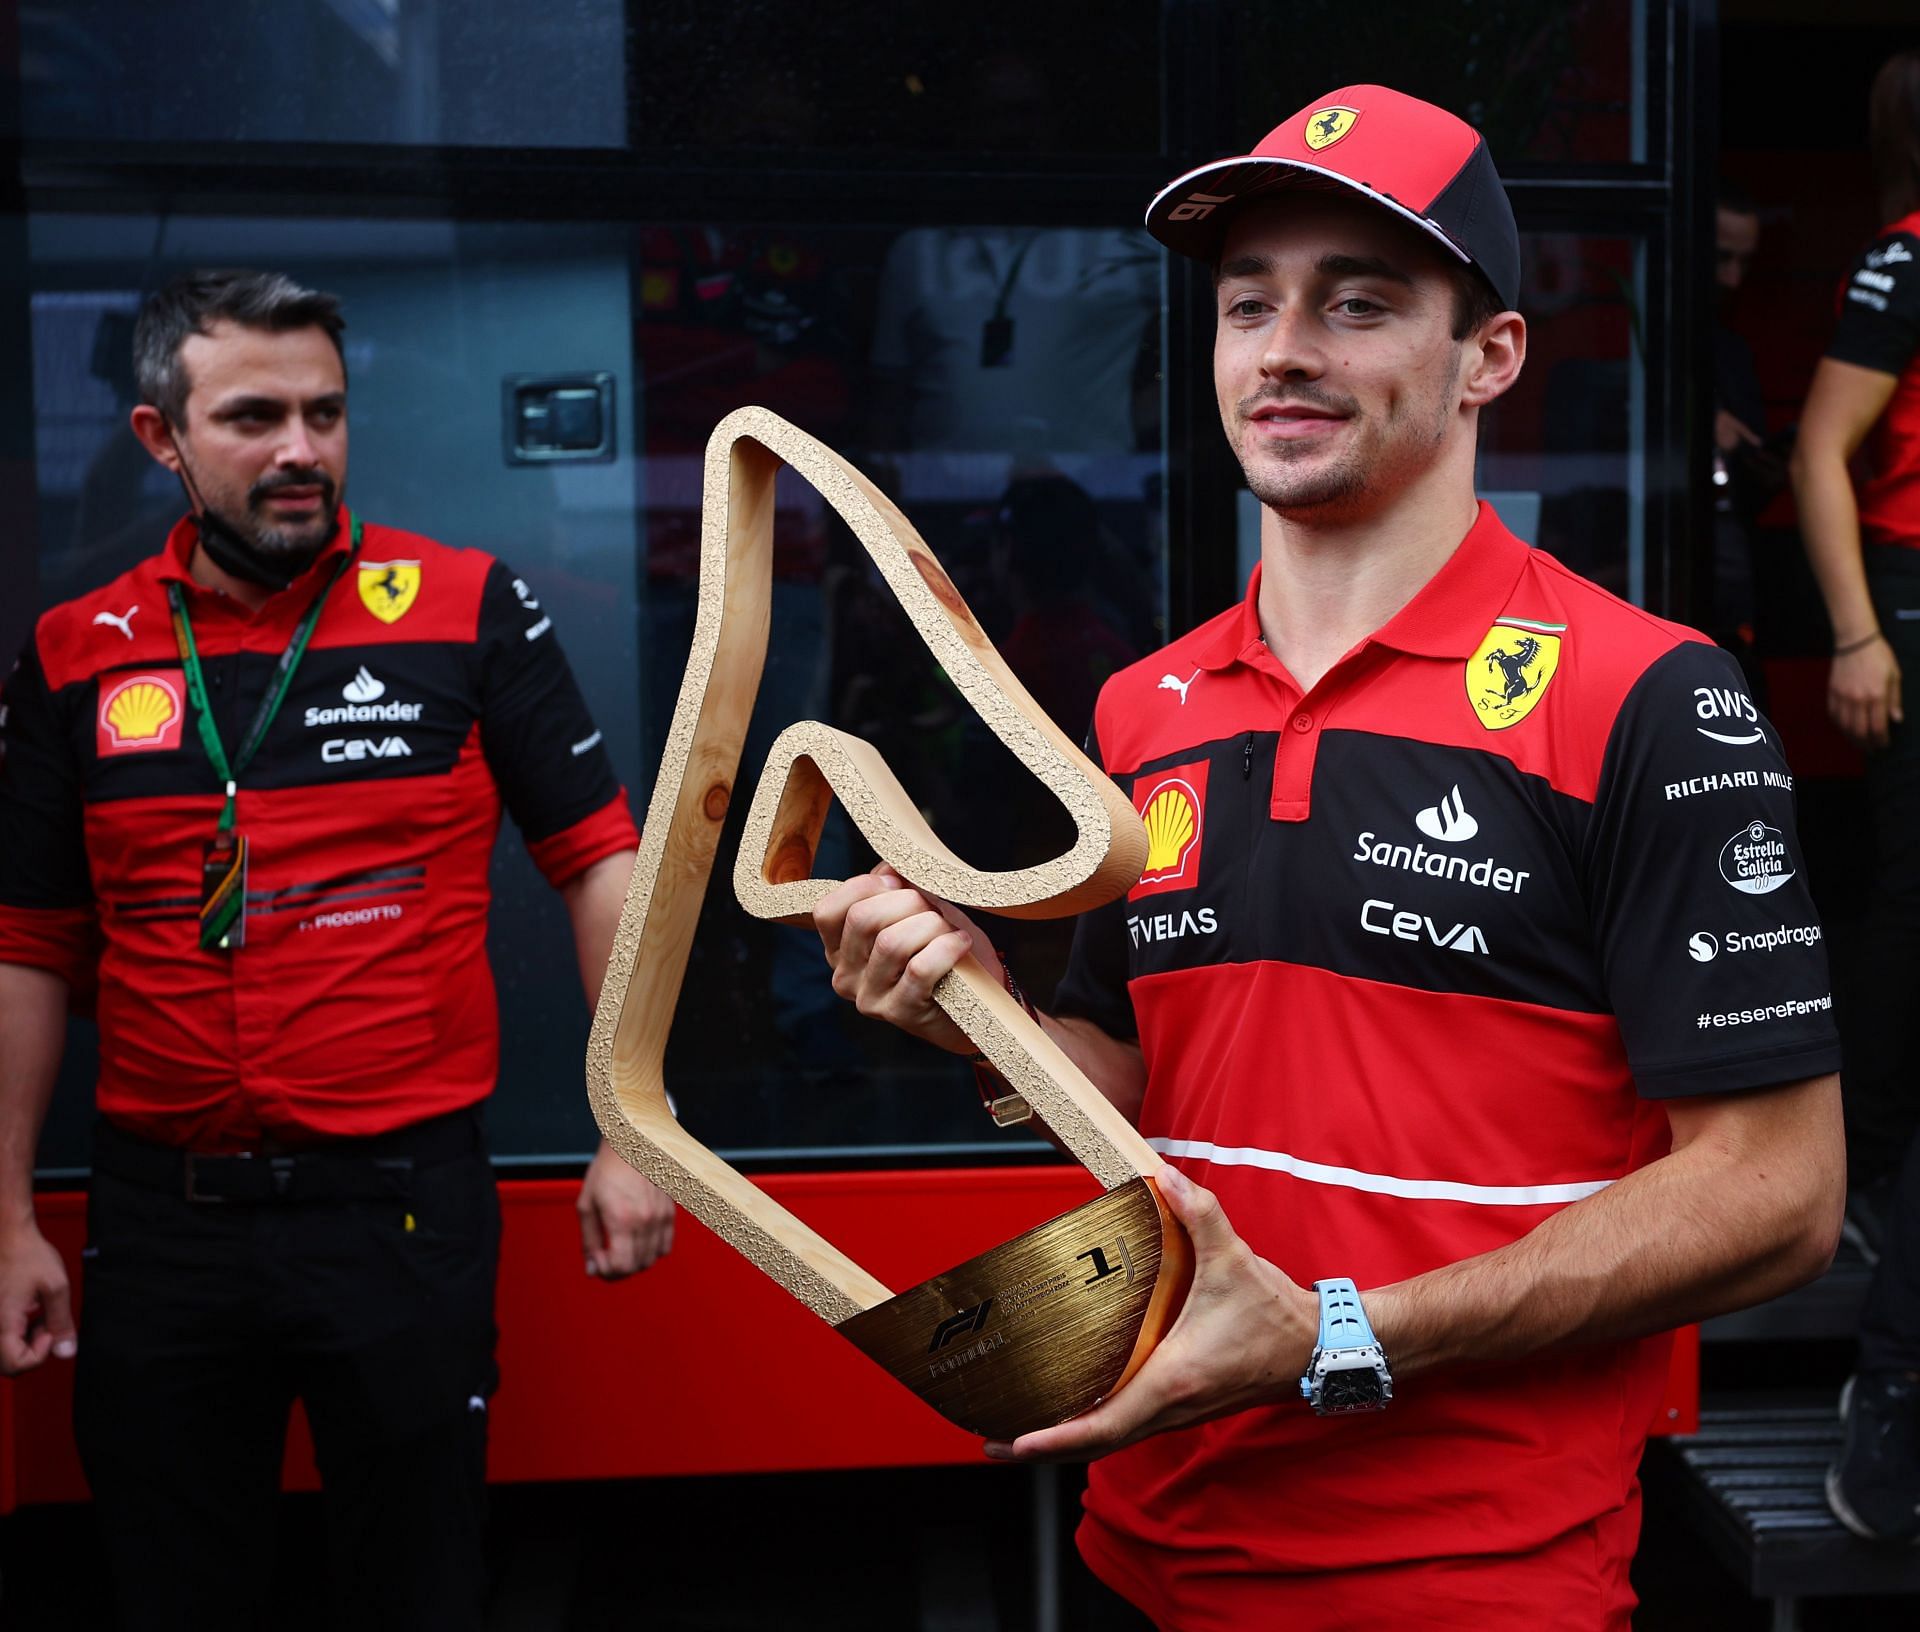 That&#039;s your winner of the 2022 F1 Austrian GP